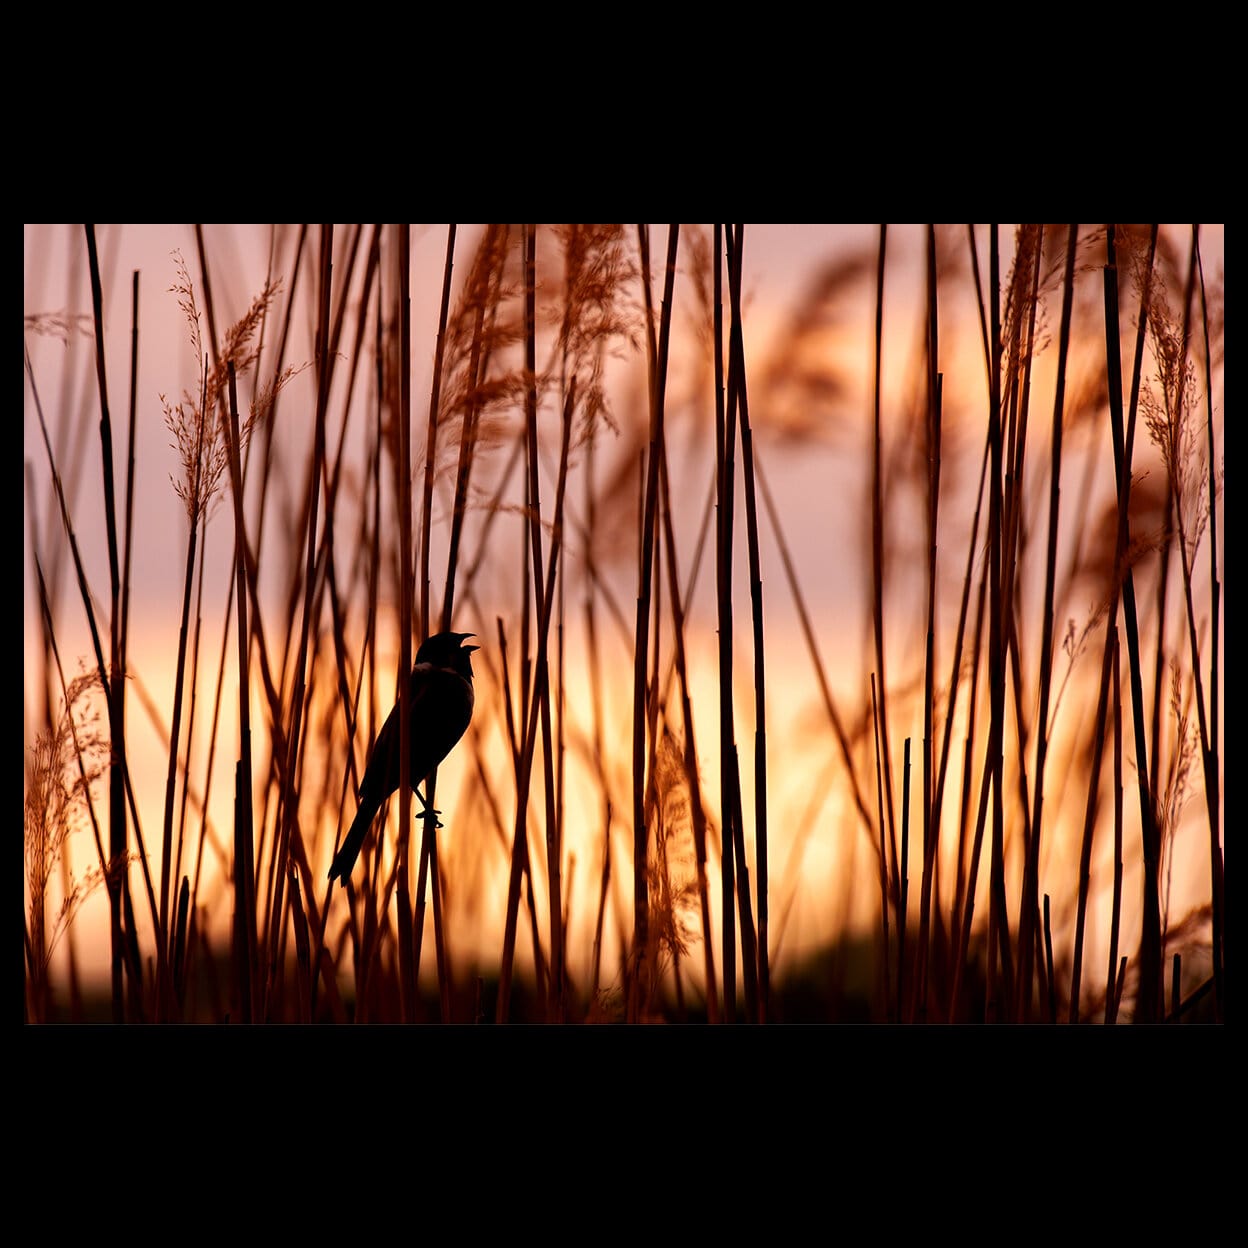 On a dazzling sunset, a small sparrow is singing on a reed.